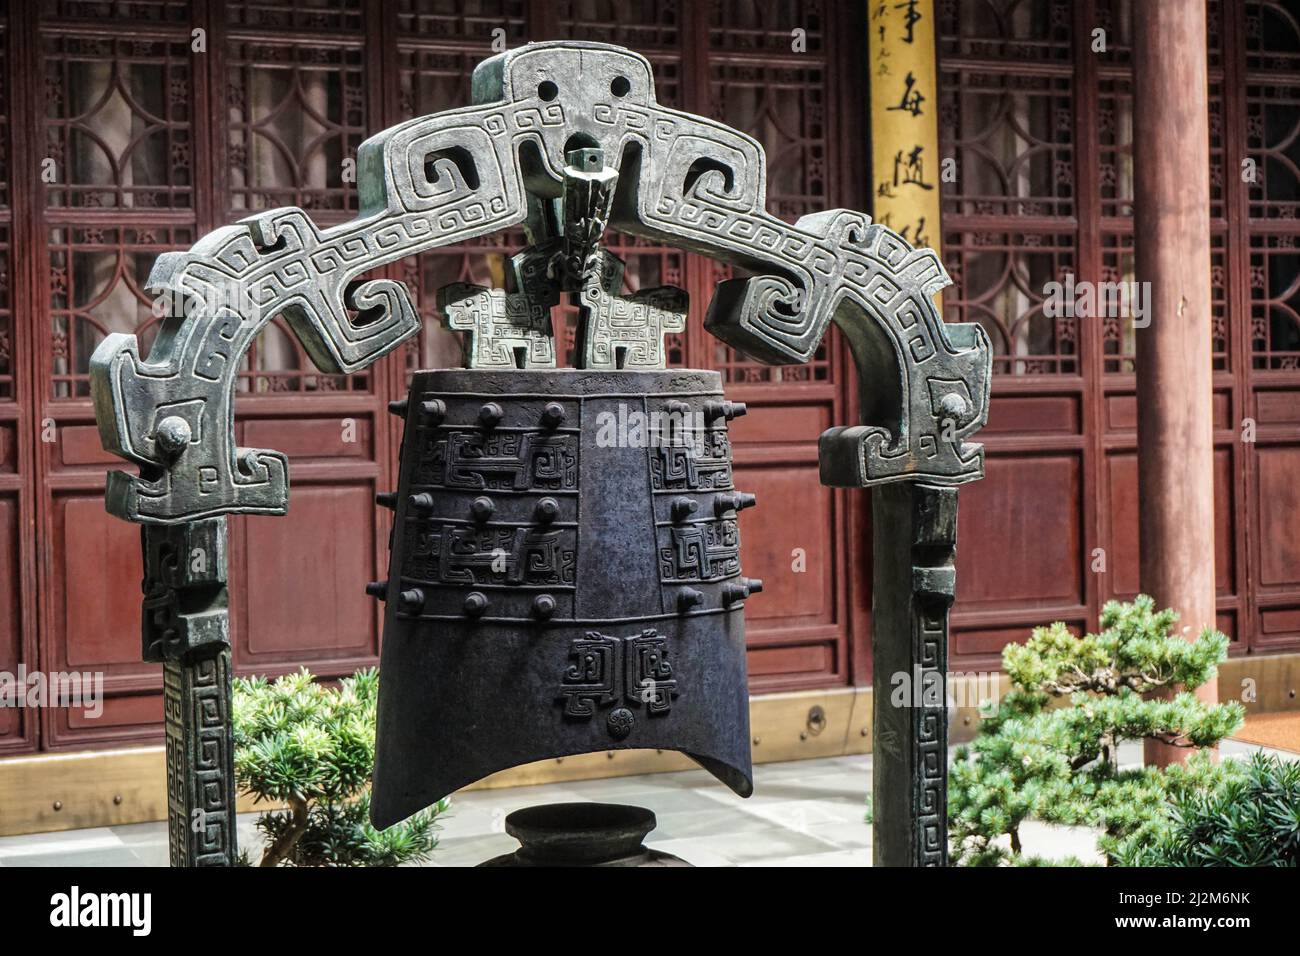 An ornamental metal statue of dogs in China Stock Photo